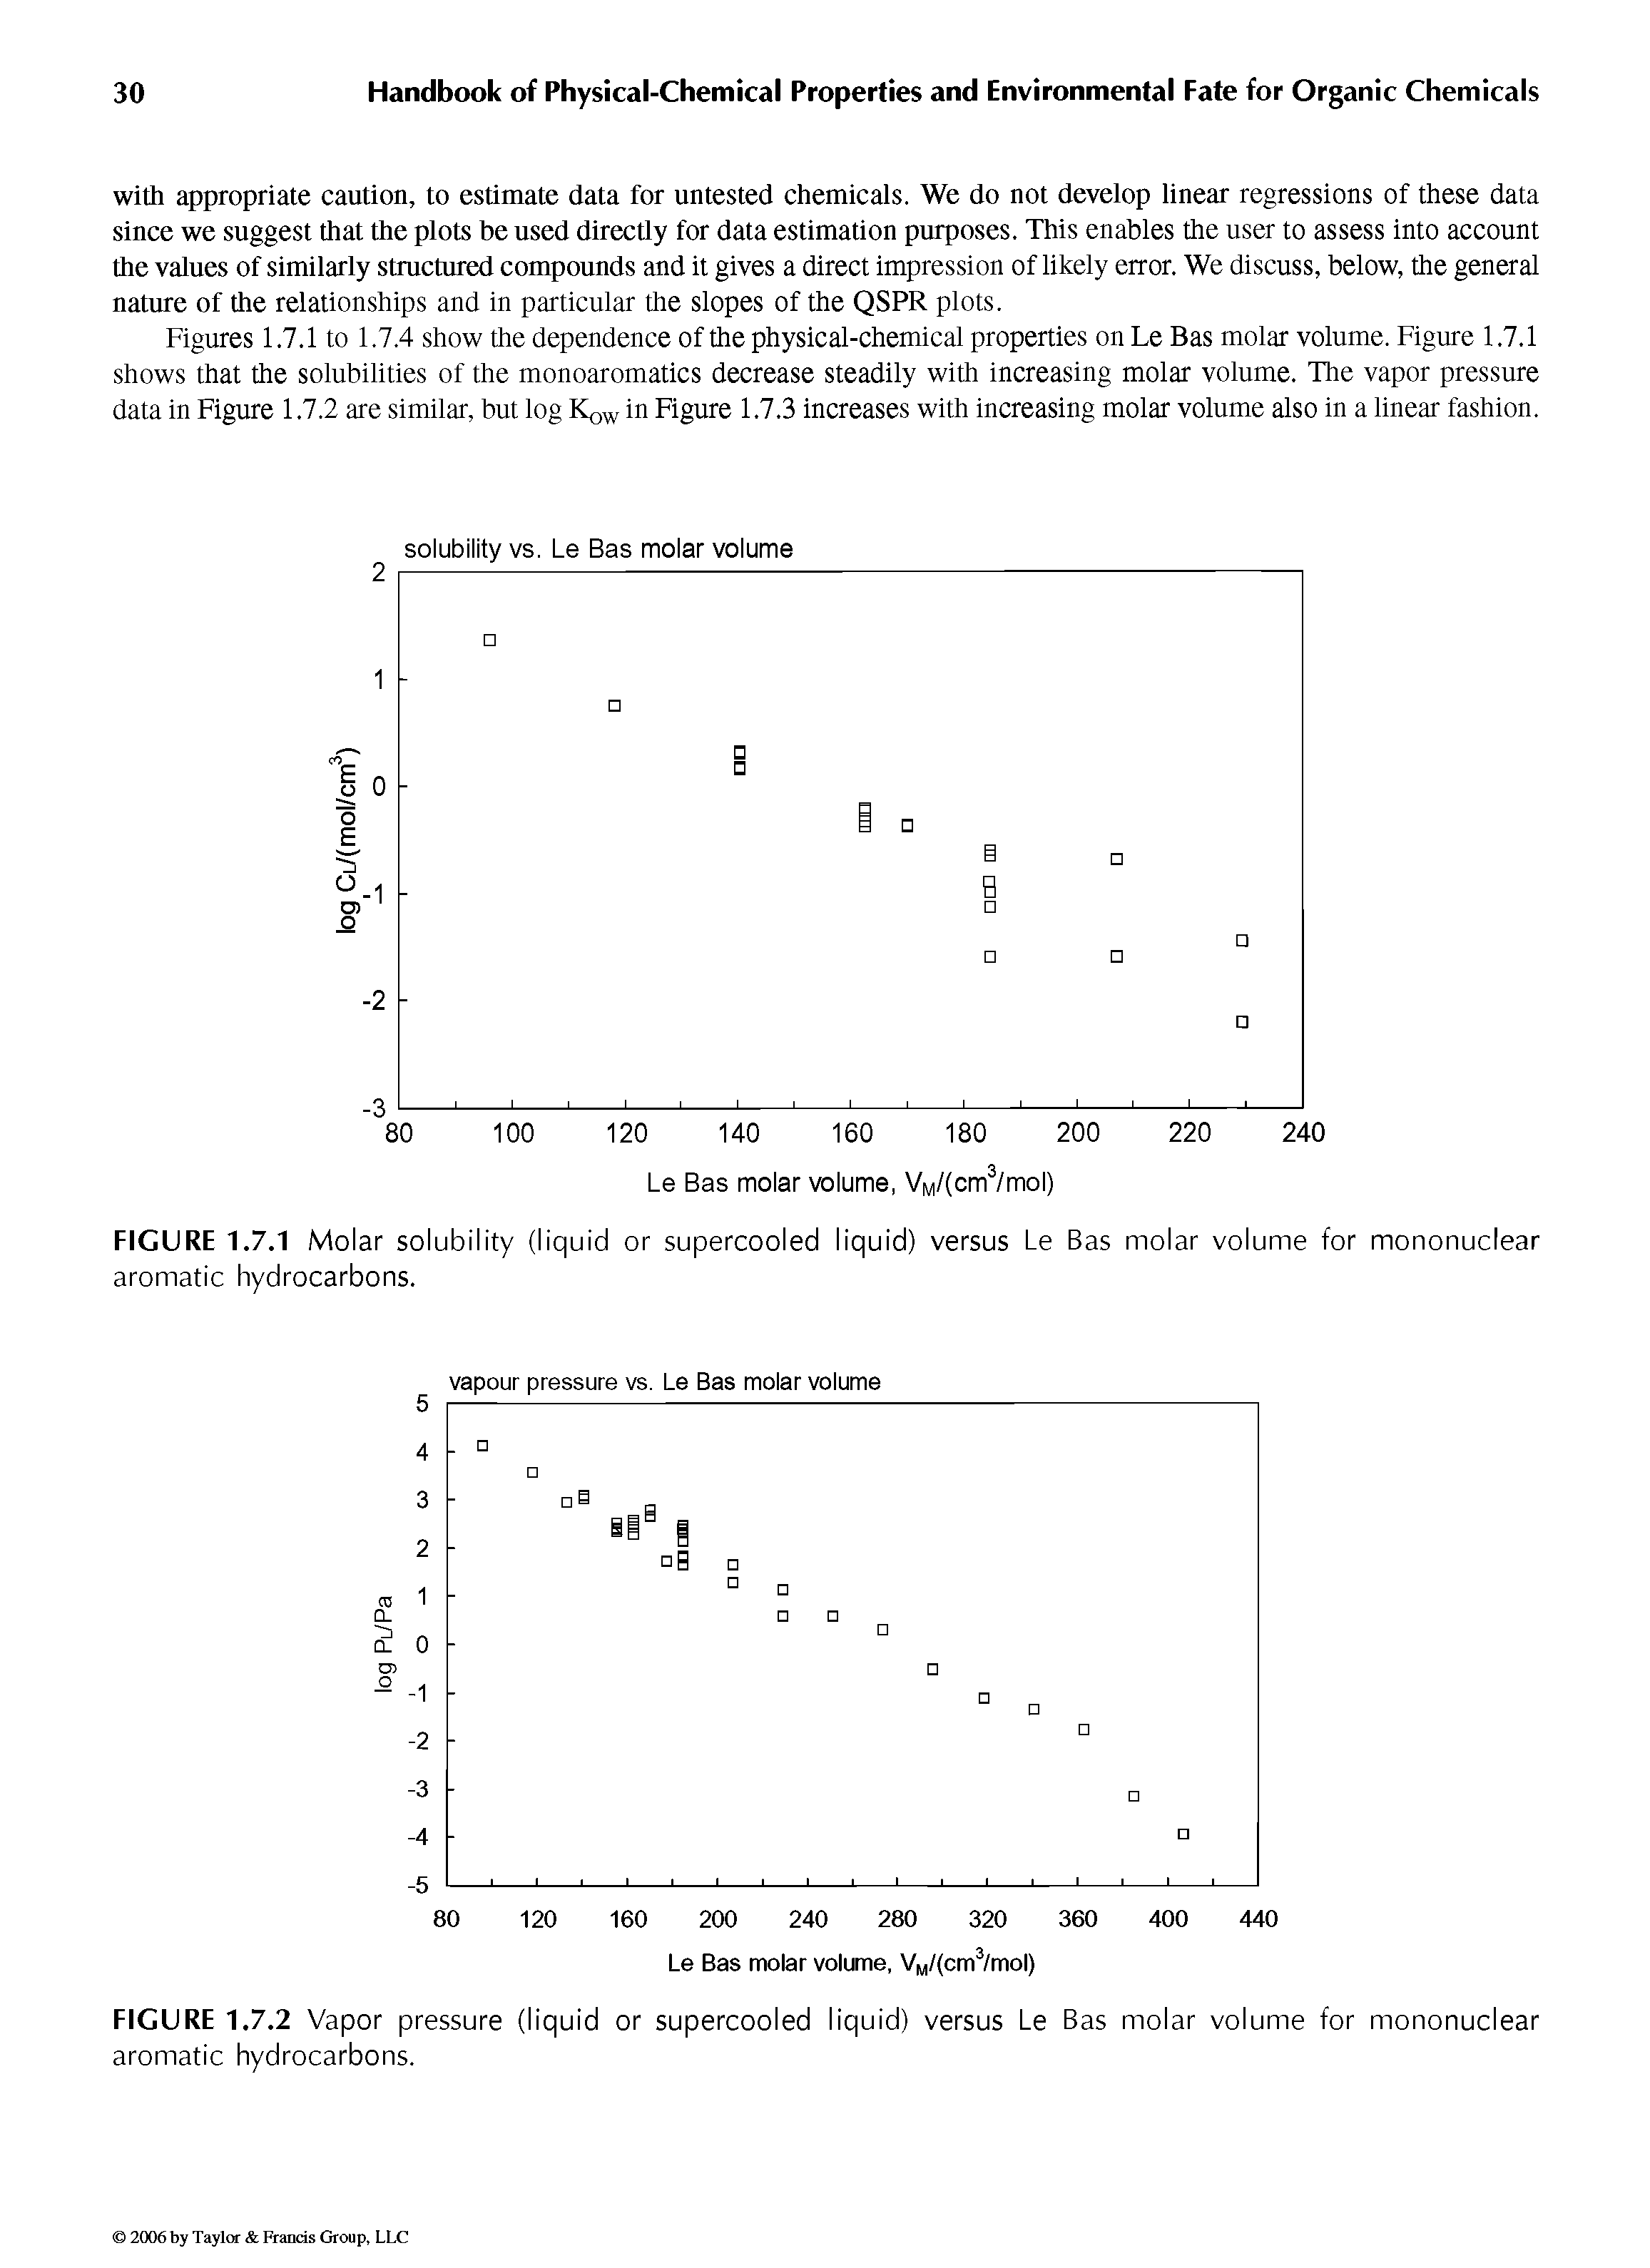 Figures 1.7.1 to 1.7.4 show the dependence of the physical-chemical properties on Le Bas molar volume. Figure 1.7.1 shows that the solubilities of the monoaromatics decrease steadily with increasing molar volume. The vapor pressure data in Figure 1.7.2 are similar, but log KoW in Figure 1.7.3 increases with increasing molar volume also in a linear fashion.